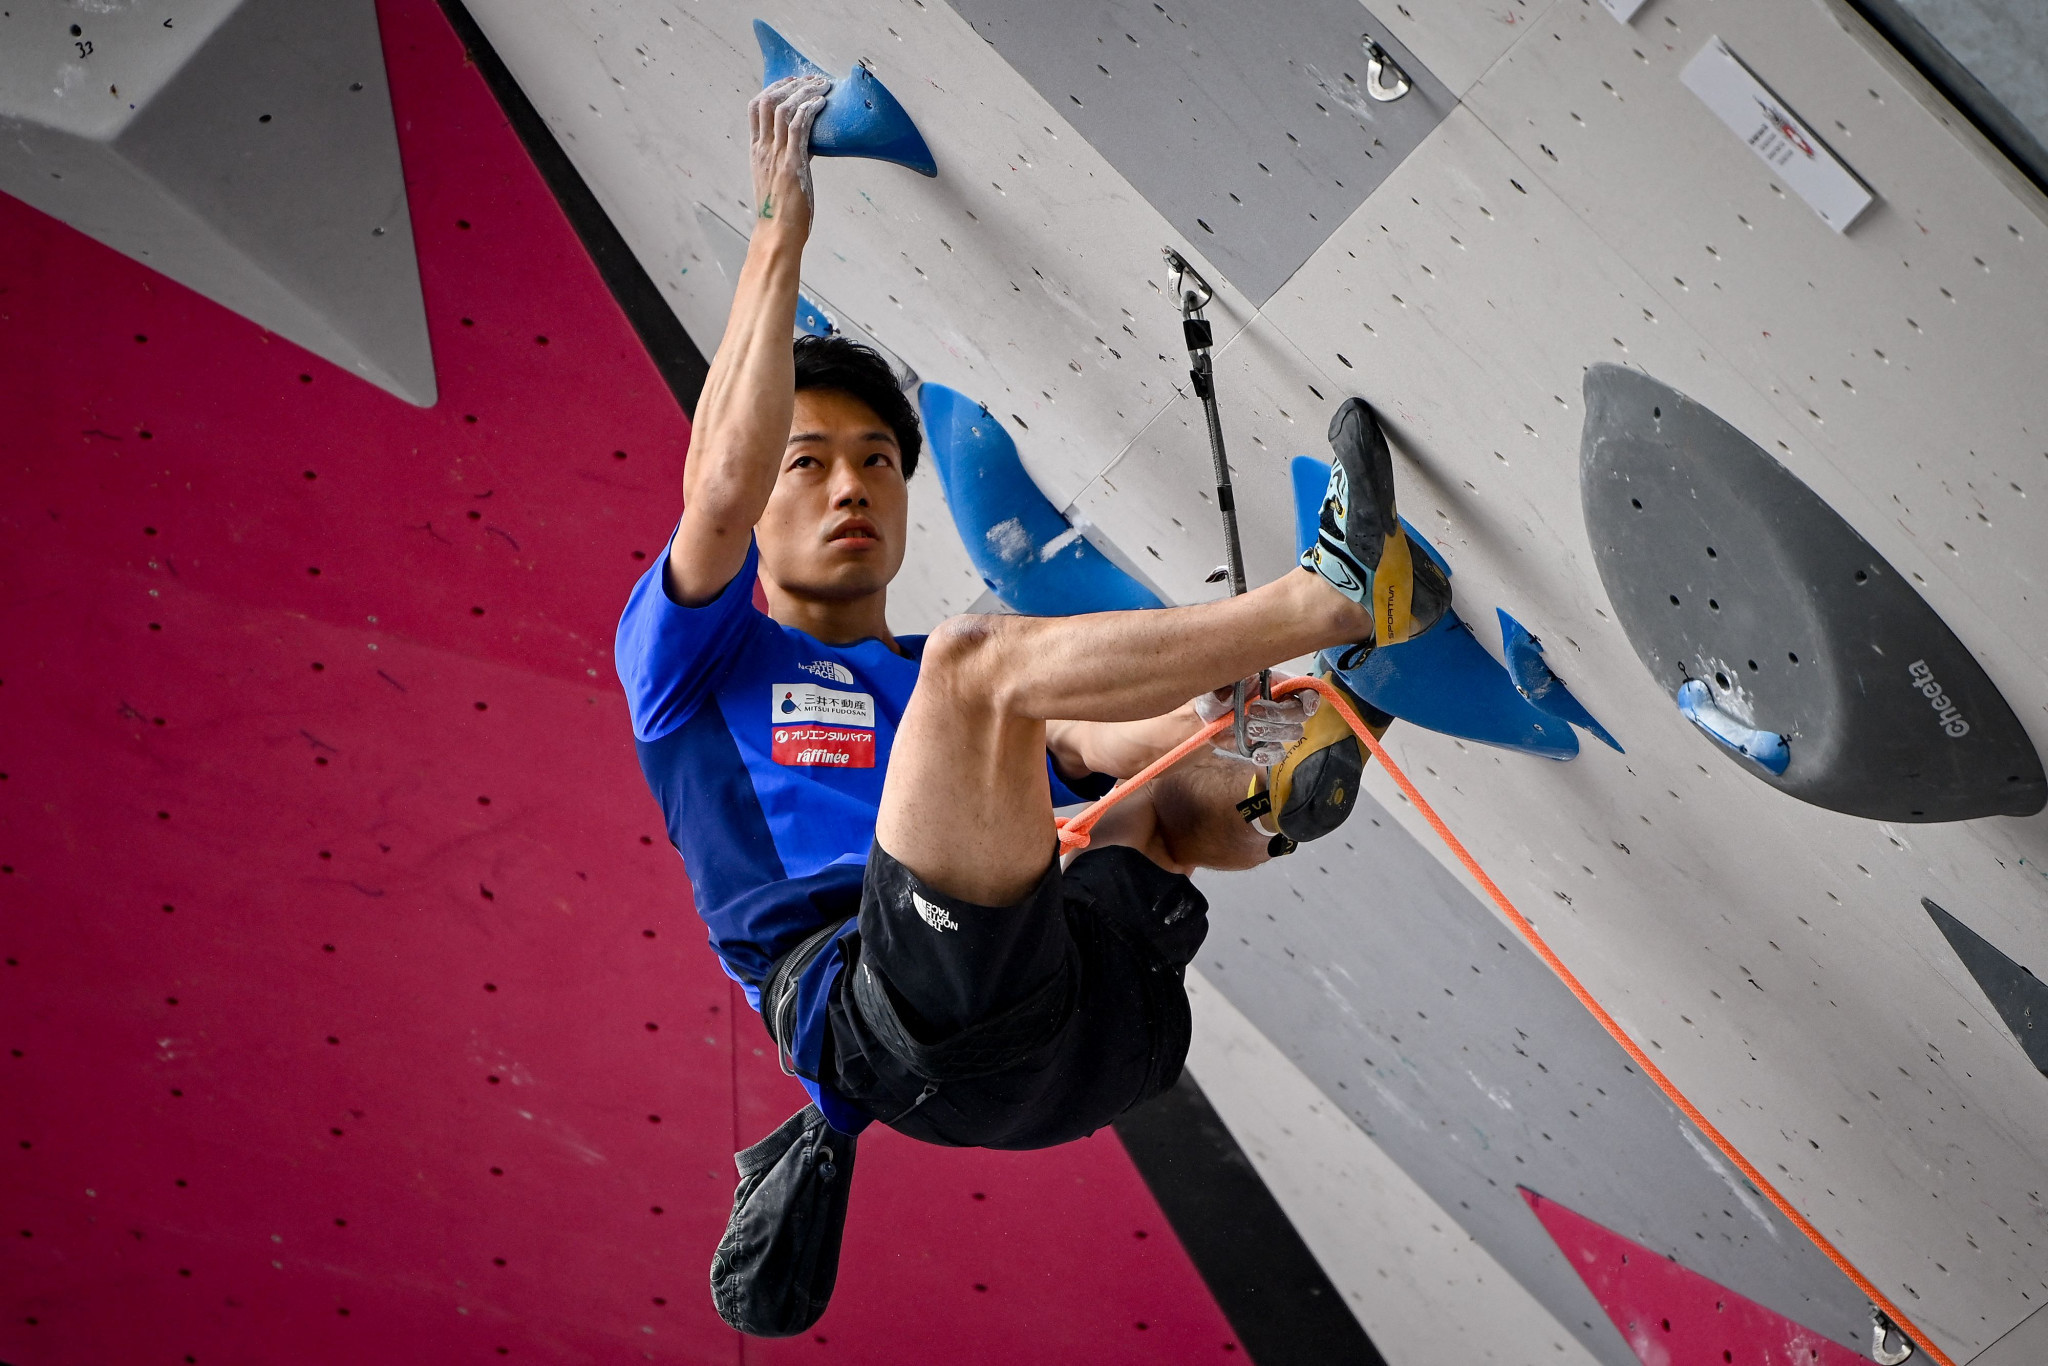 Masahiro Higuchi won the IFSC men's lead World Cup leg in Kranj to move up to third in the season's standings ©Getty Images